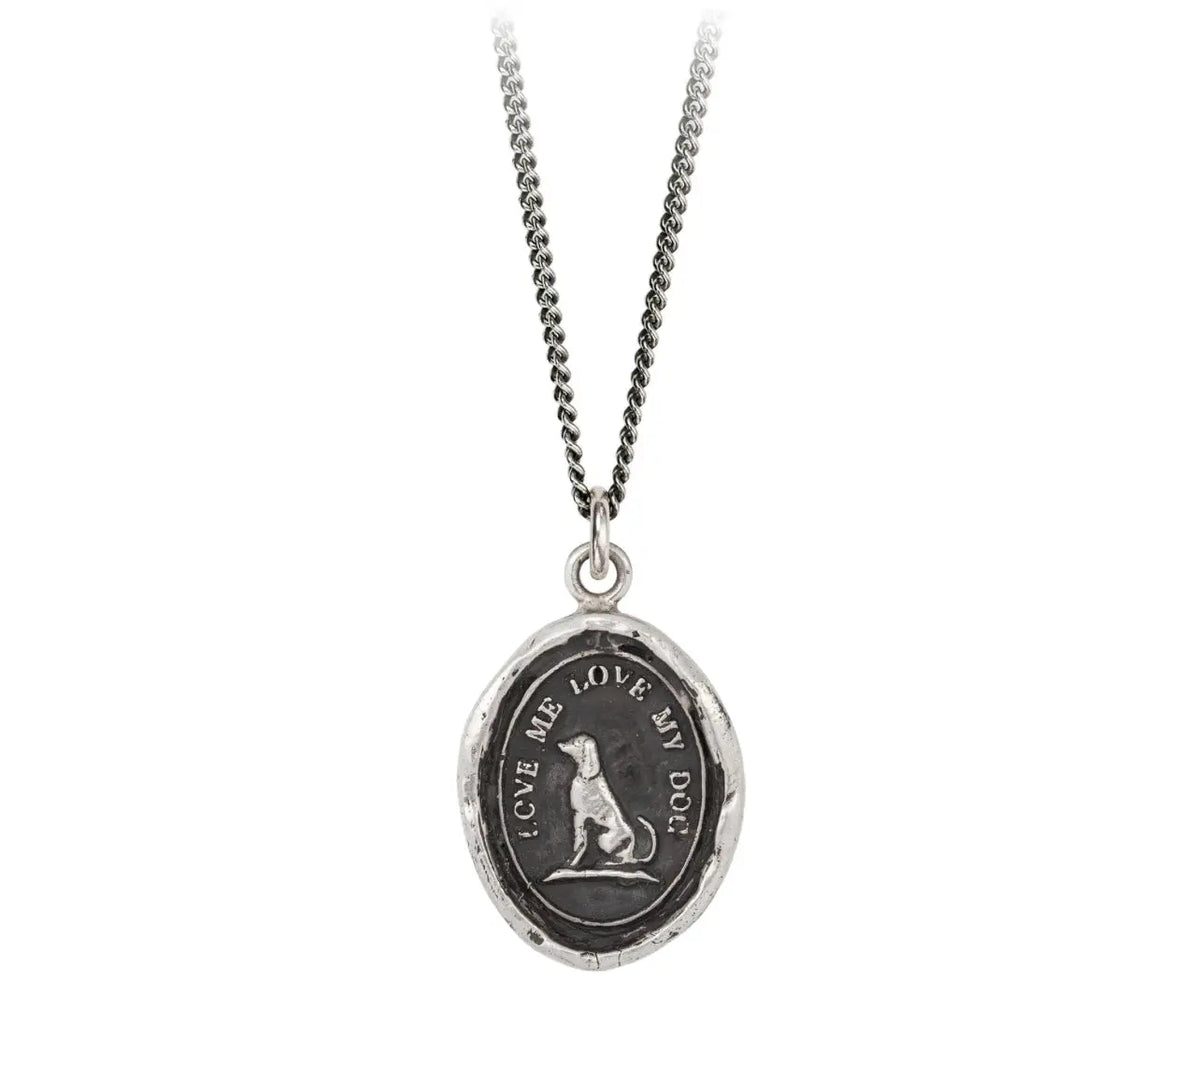 This talisman features a dog accompanied by the expression &#39;Love Me Love My Dog&#39;. The image of a dog is a symbol of unconditional love from and for one&#39;s dog.  As a certified carbon-neutral B Corp, were committed to environmental responsibility—our jewelry is sustainably handcrafted with 100% recycled metals in our Vancouver studio using antique wax seals and imagery from the Victorian era.